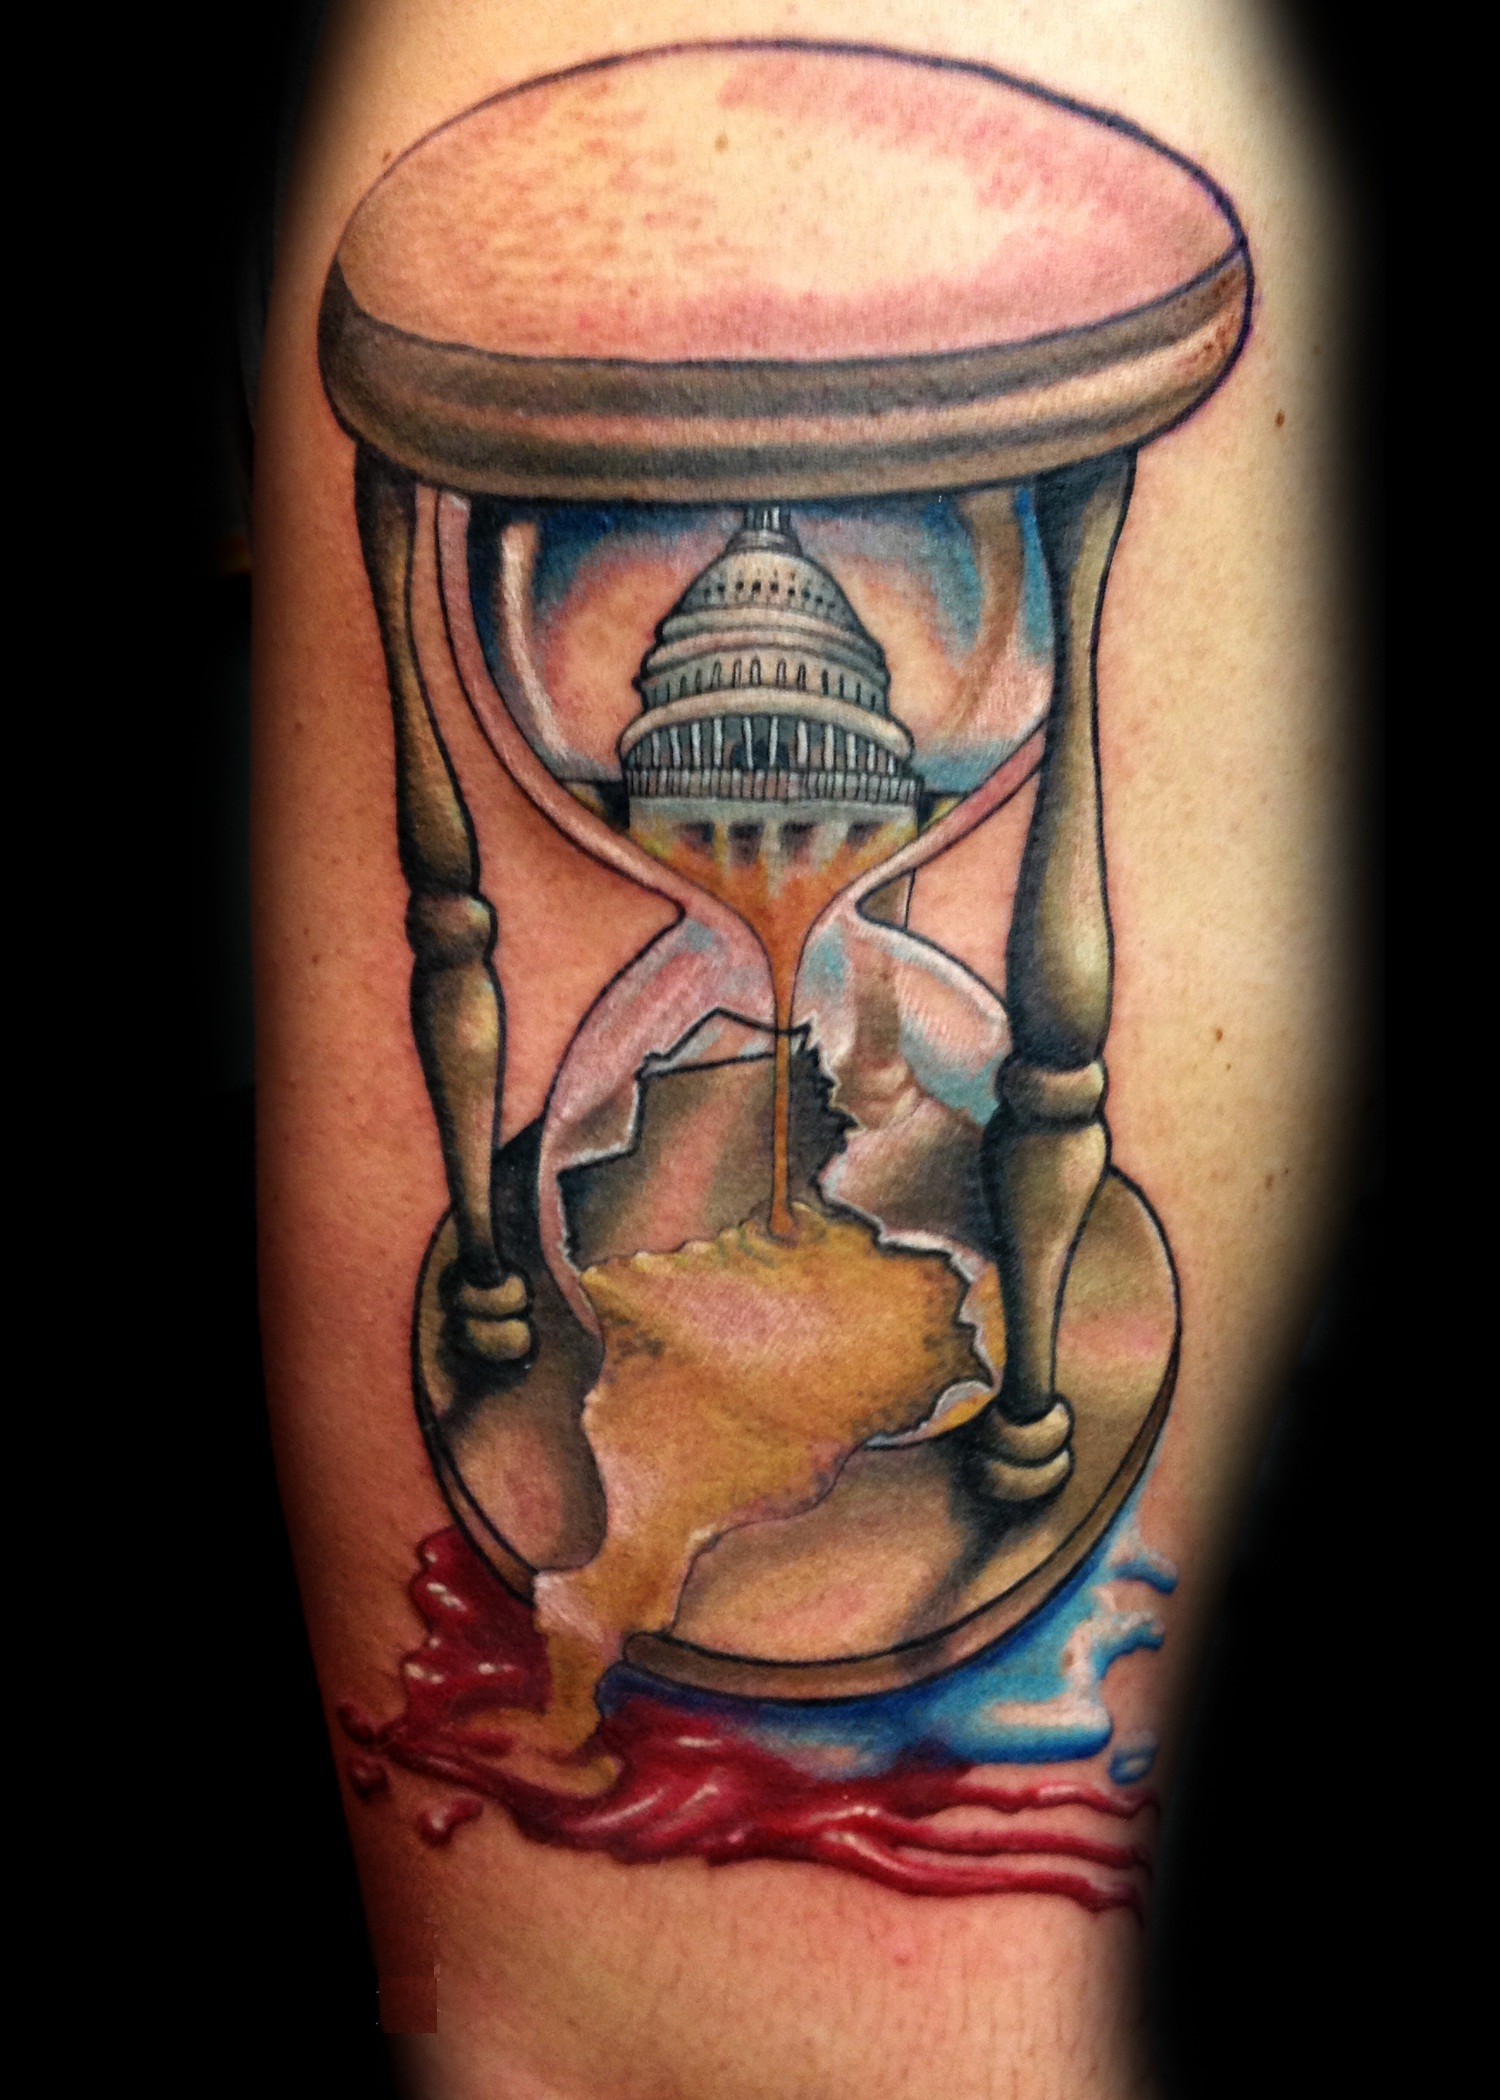 Hourglass Tattoos Designs, Ideas and Meaning | Tattoos For You